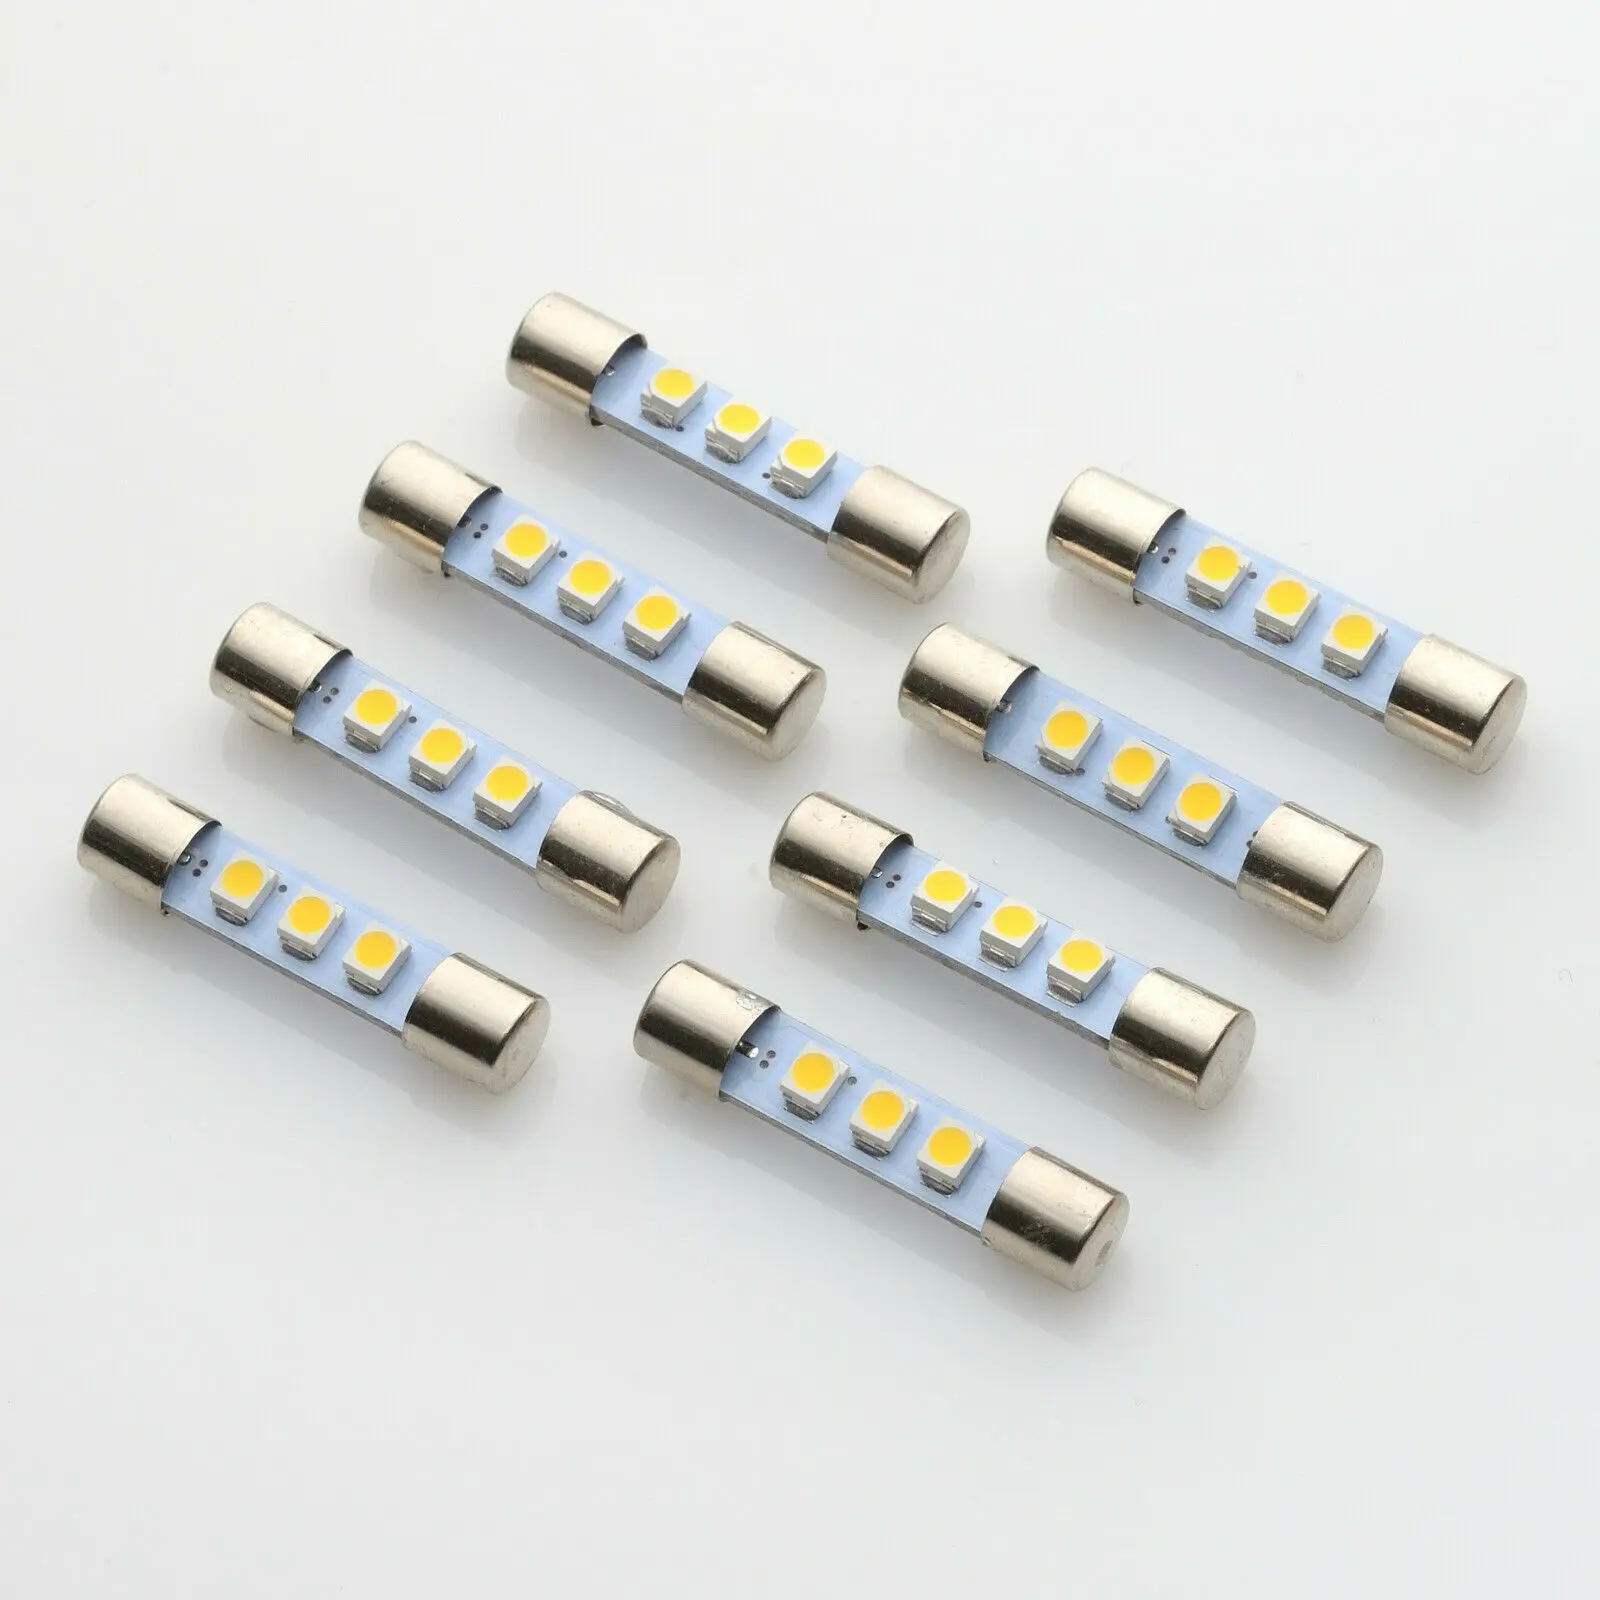 SX-424 8 WARM WHITE 8V LED Lamp Fuse-Type Bulbs for Pioneer QX-949 SX-434-8WW 